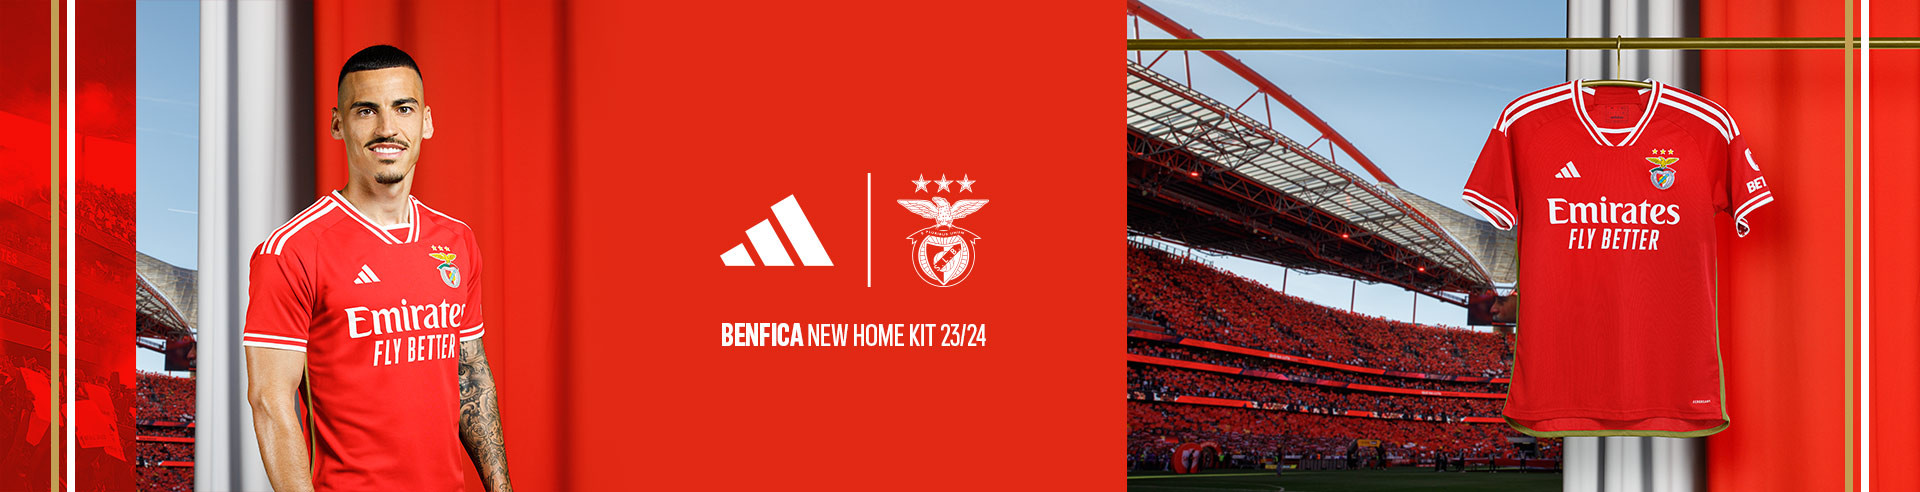 Adidas Benfica New Home Kit 23/24 PT